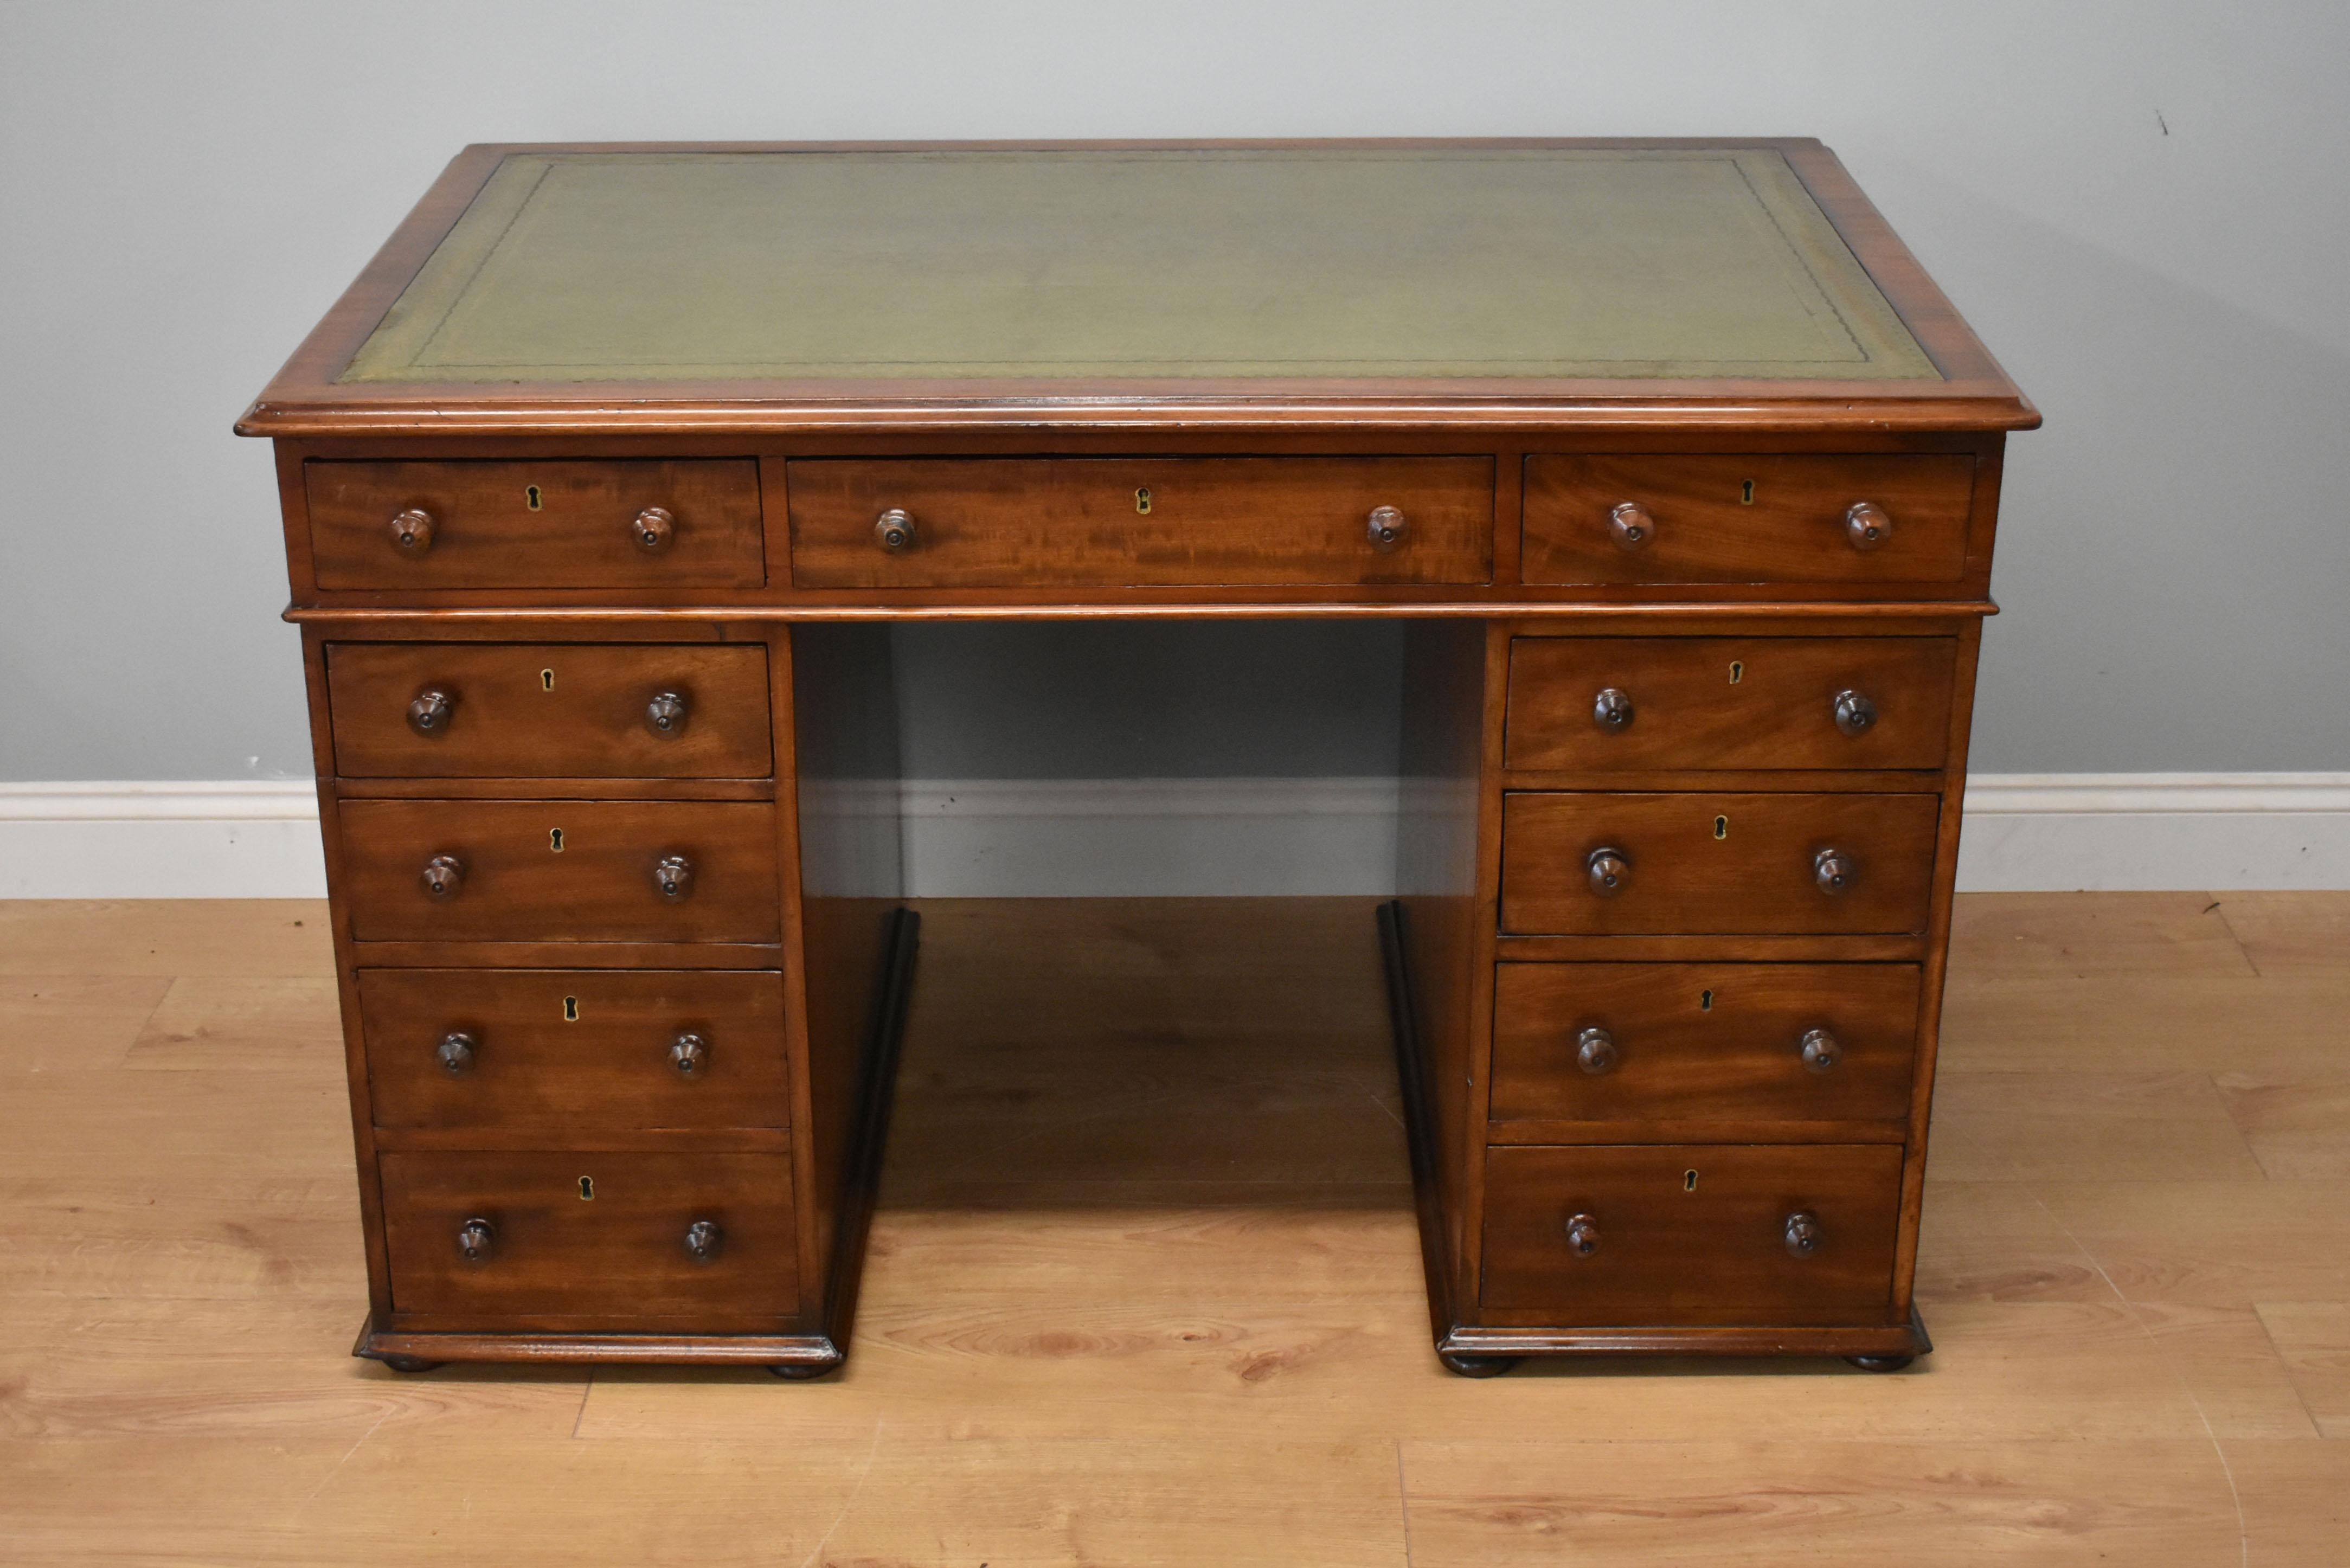 For sale is a good quality 19th century Victorian mahogany partners desk of small proportions. The top of the desk is inset with an antique green leather, with decorative gold and blind tooling. The top has three drawers on the front side, and three